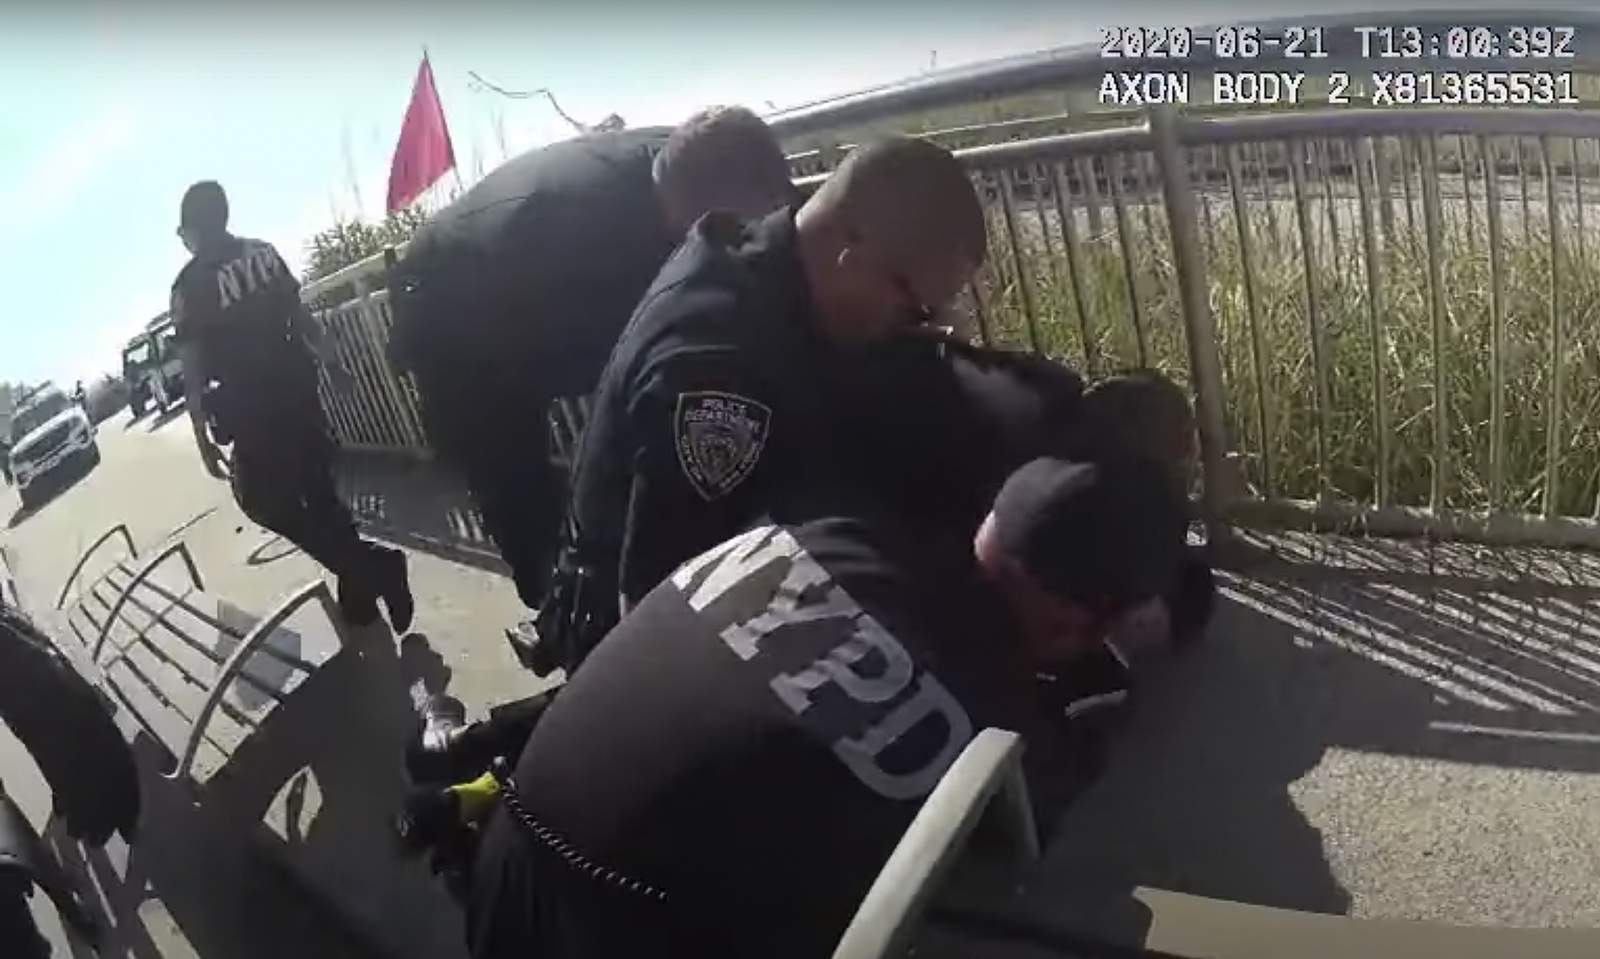 NYPD officer in 'chokehold' video had prior brutality case